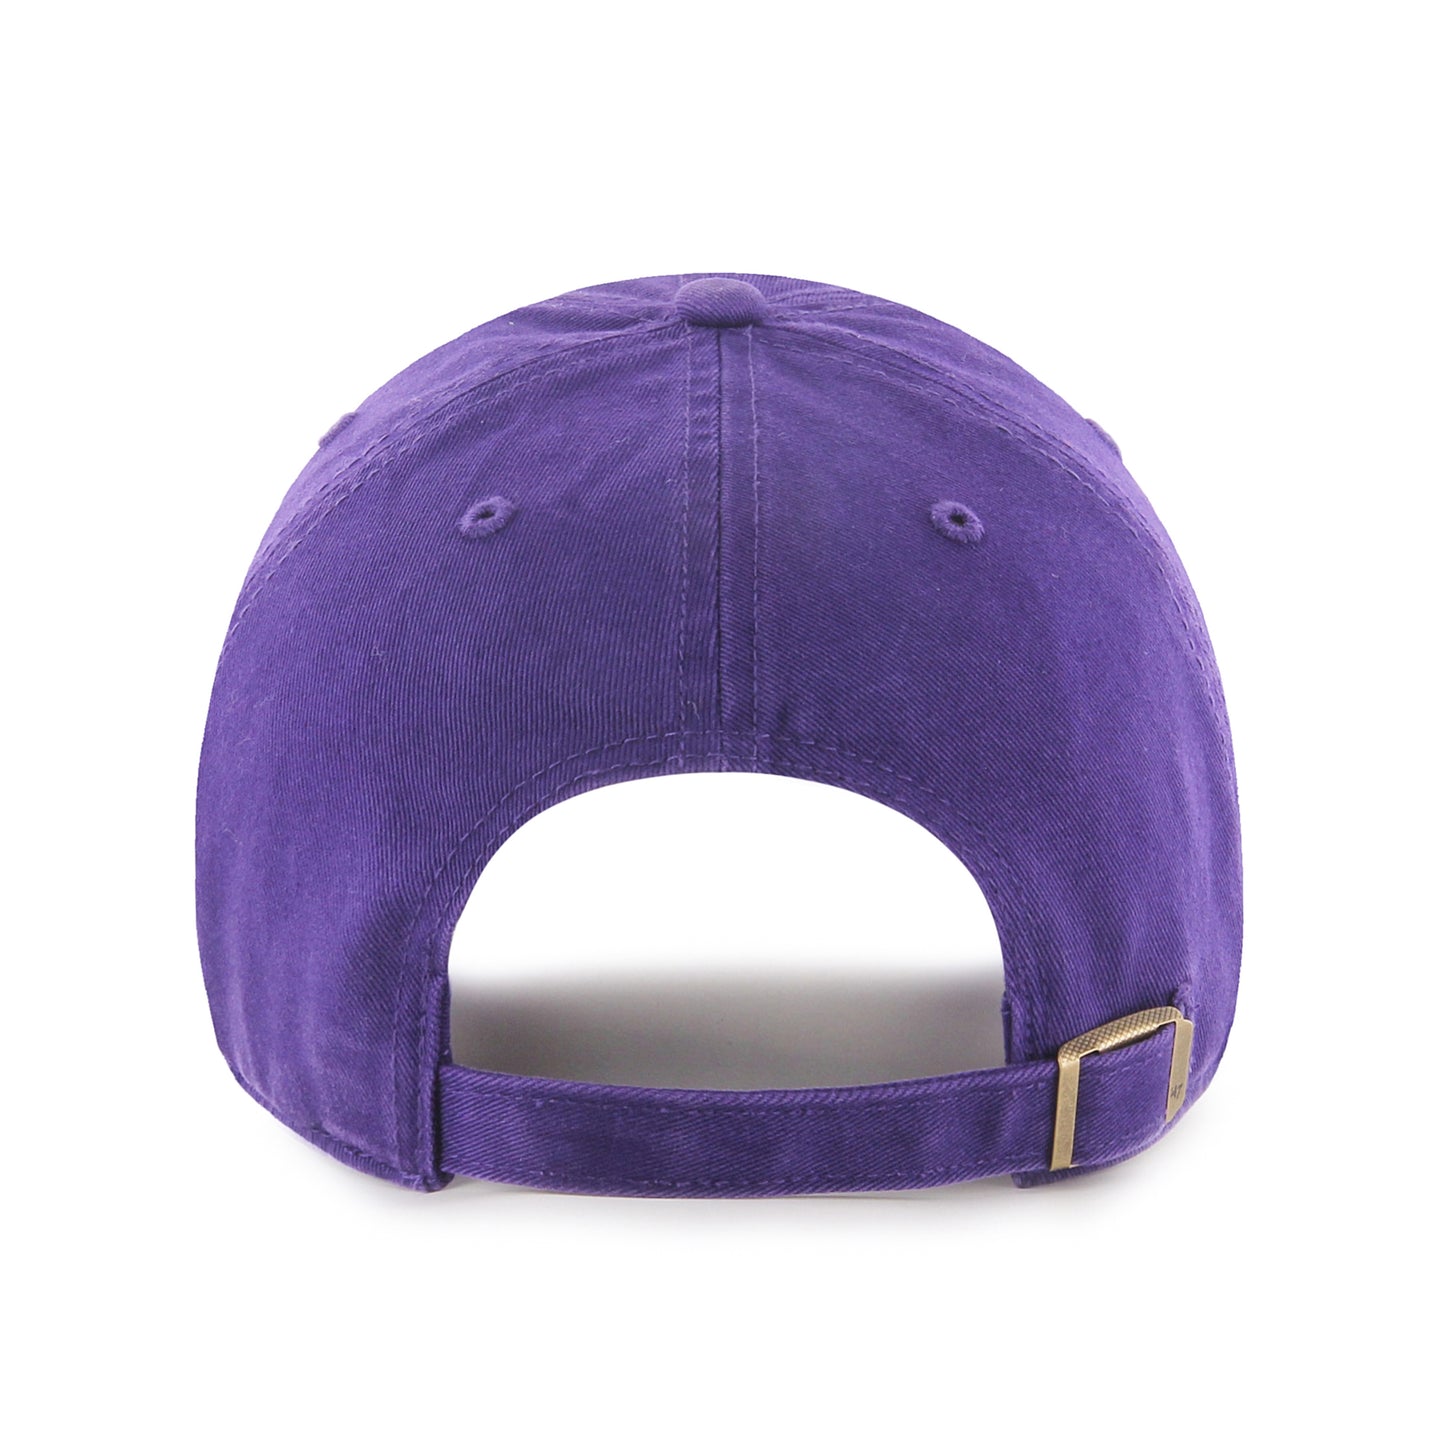 Baltimore Ravens '47 2023 AFC North Division Champions Clean Up Adjustable Hat - Purple